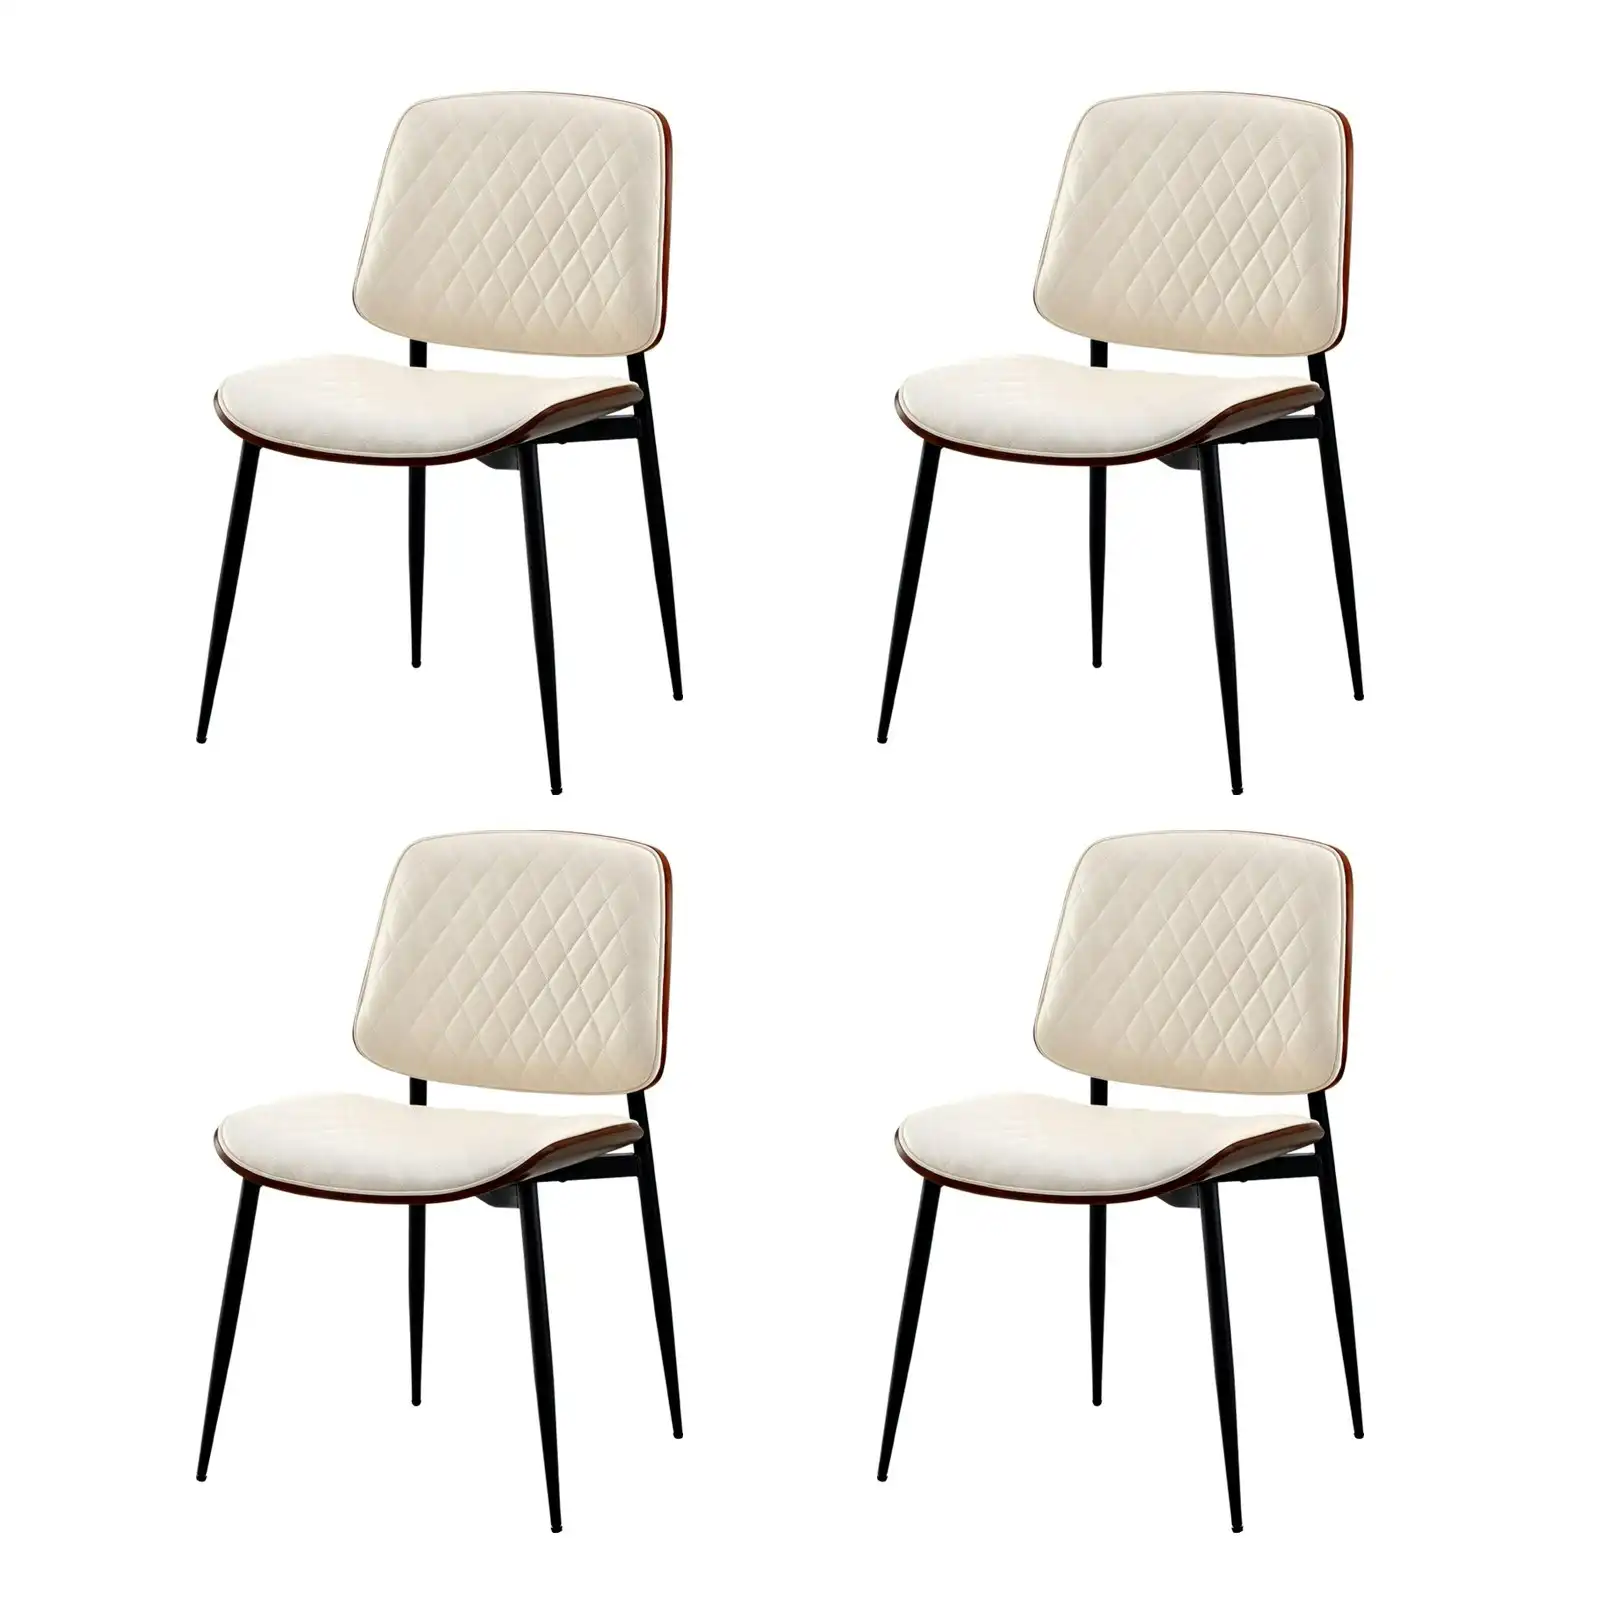 Oikiture 4x Dining Chairs Retro Faux Leather Solid Beech Wood Metal Legs White